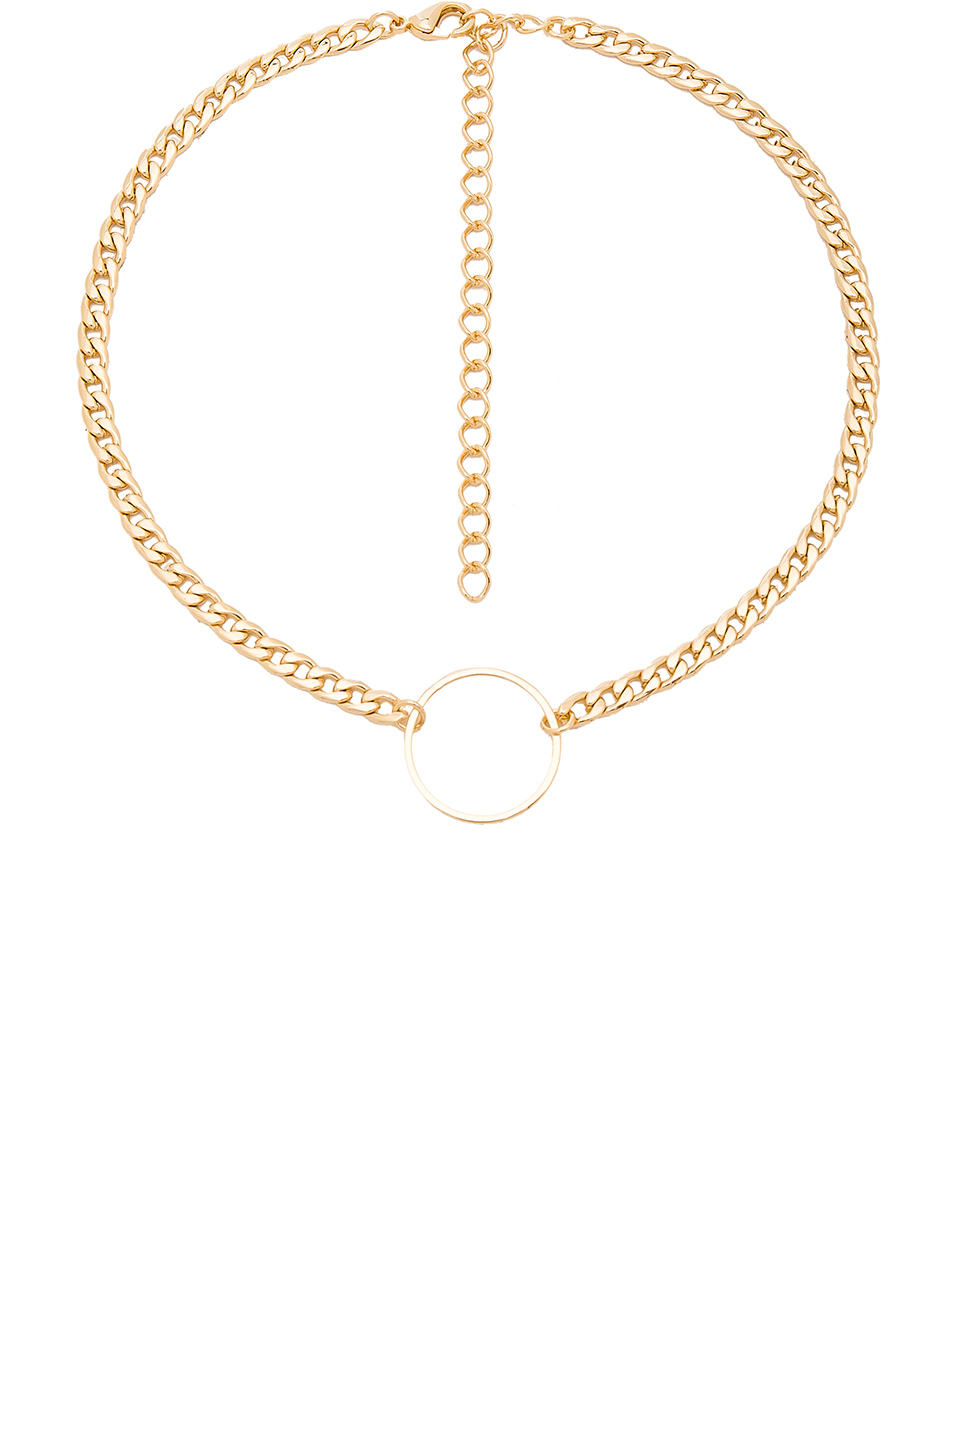 http://www.revolve.com/8-other-reasons-ring-of-fire-choker/dp/8OTH-WL133/?d=Womens&page=1&lc=13&itrownum=5&itcurrpage=1&itview=01